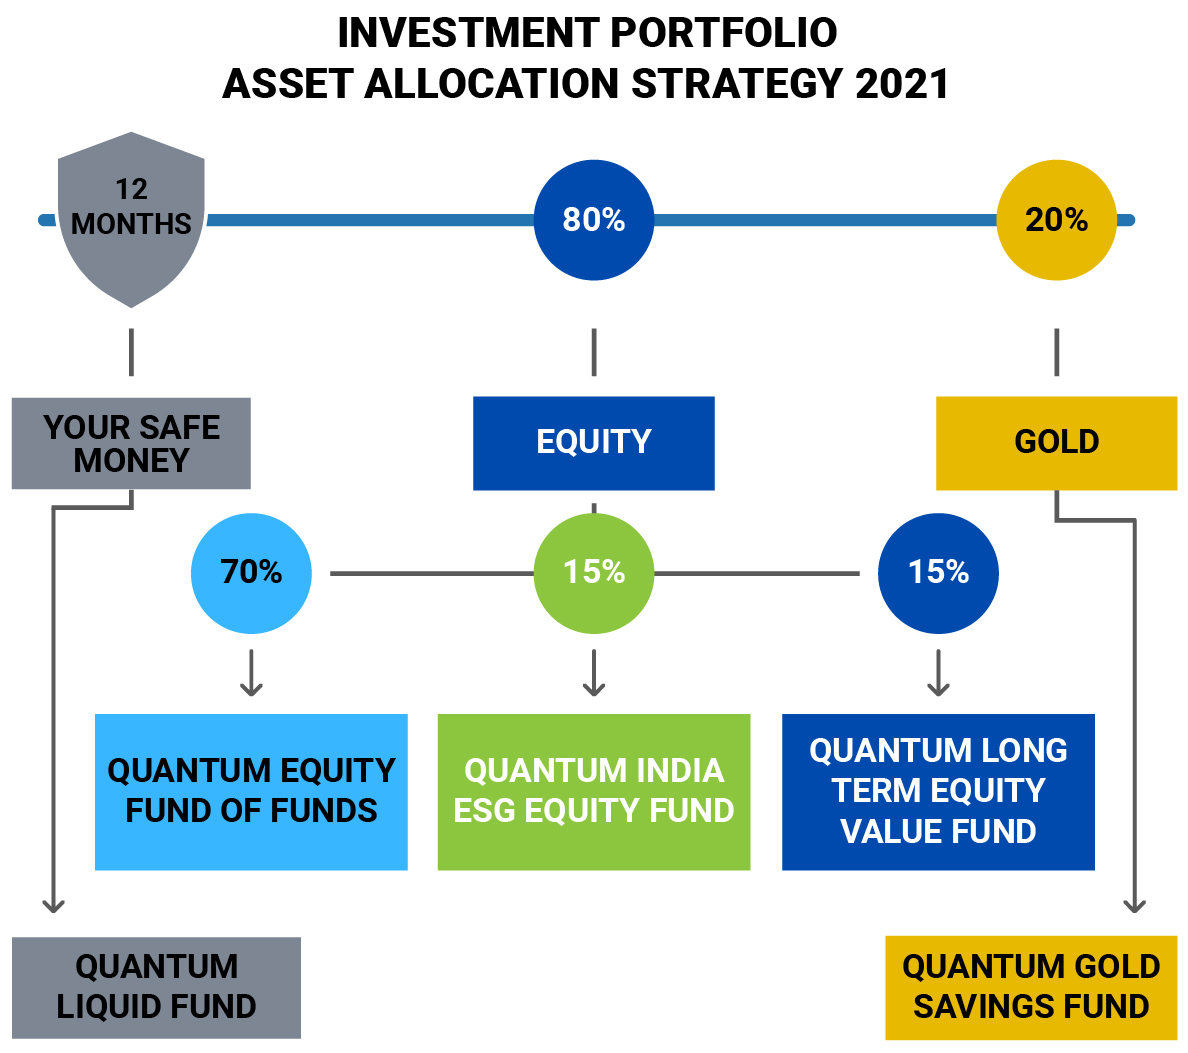 Asset Allocation strategy 2021